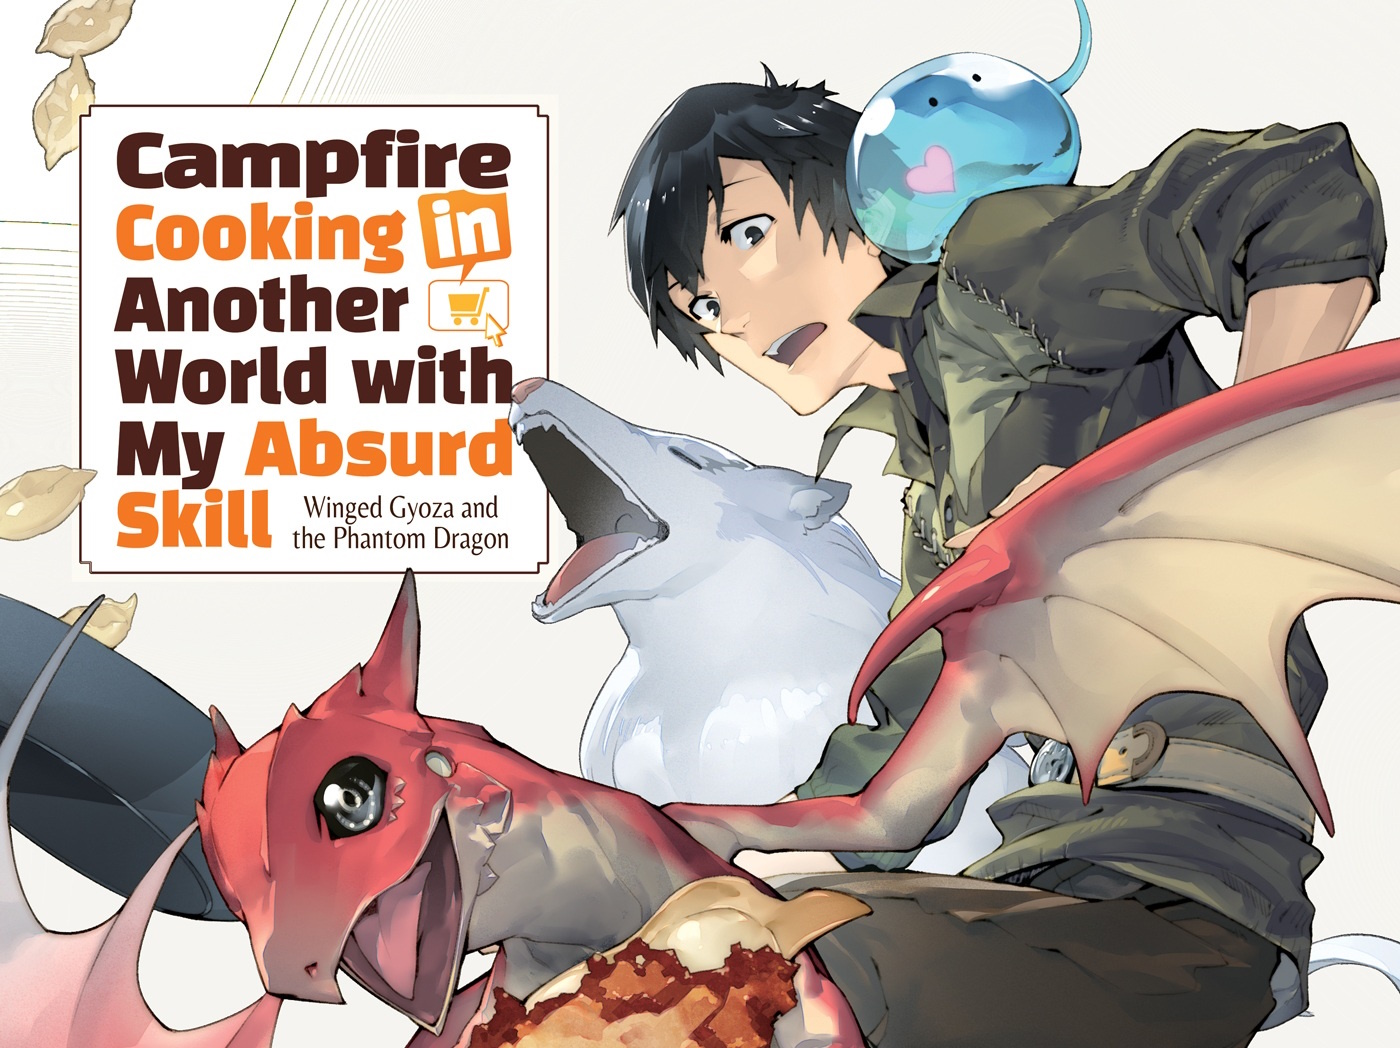 12 Manga Like Campfire Cooking in Another World with My Absurd Skill